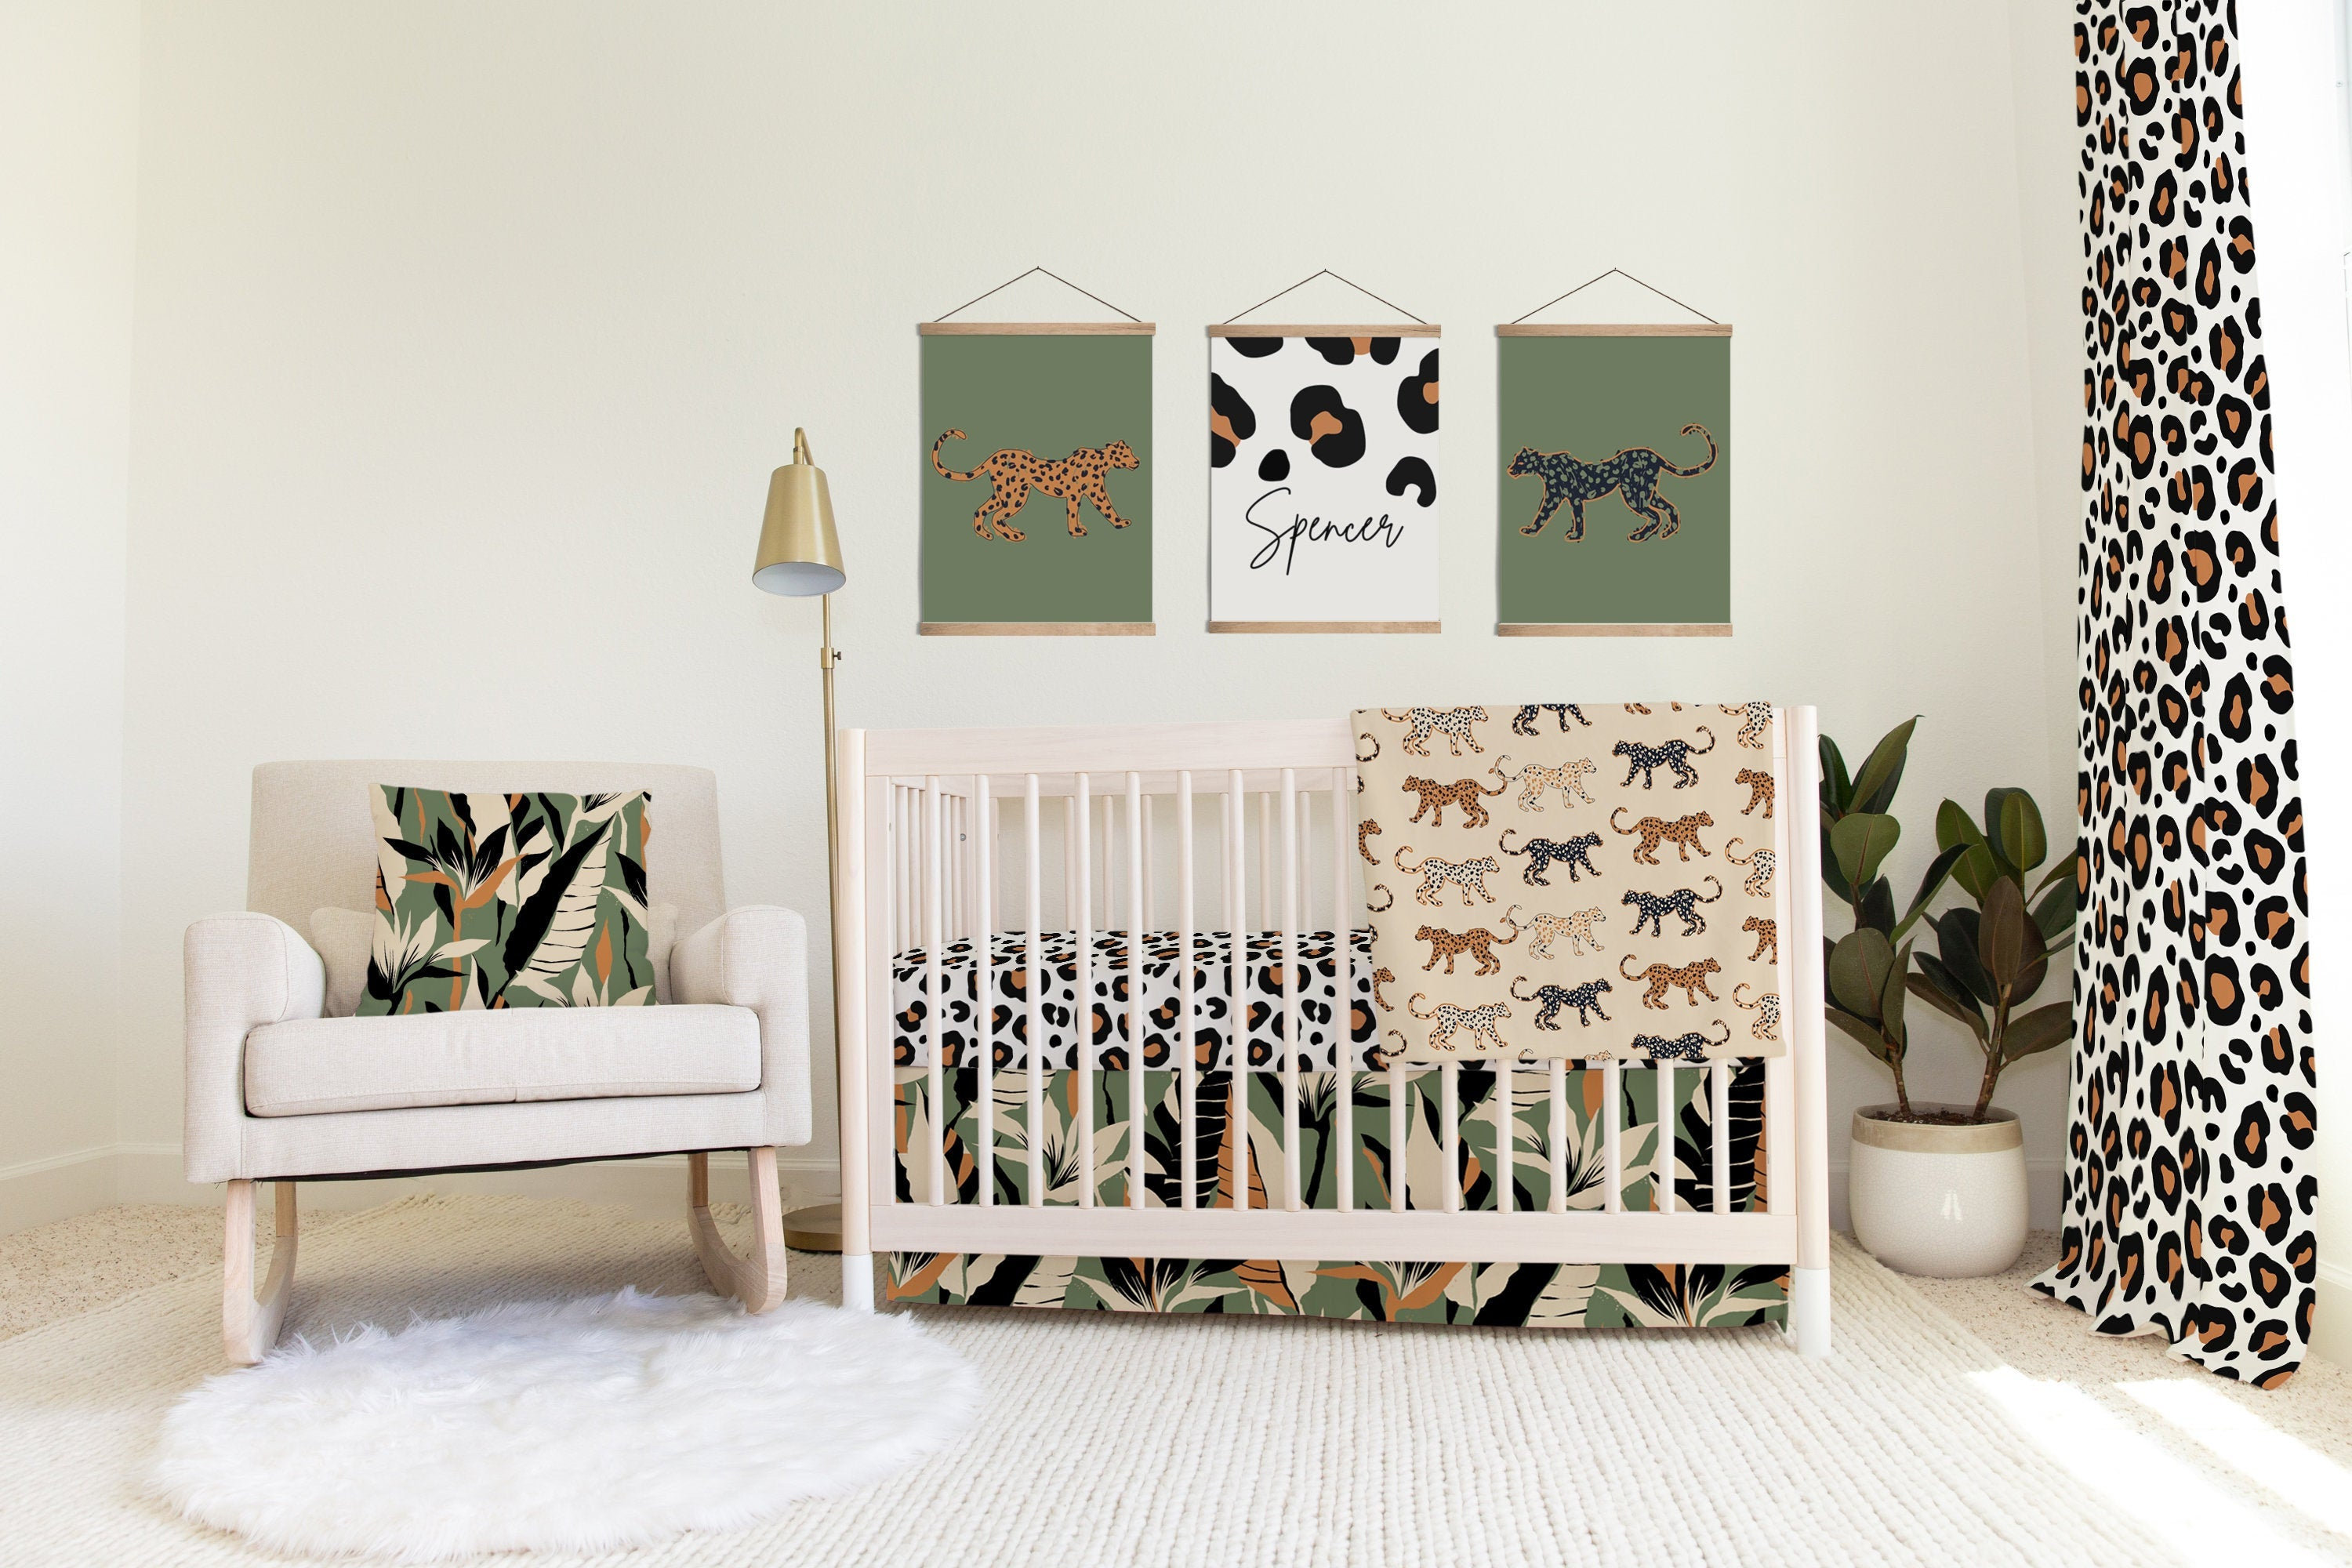 Best Pink and Gold Crib Bedding Sets For Your Nursery: How To Pick The Perfect Designs For Your Baby